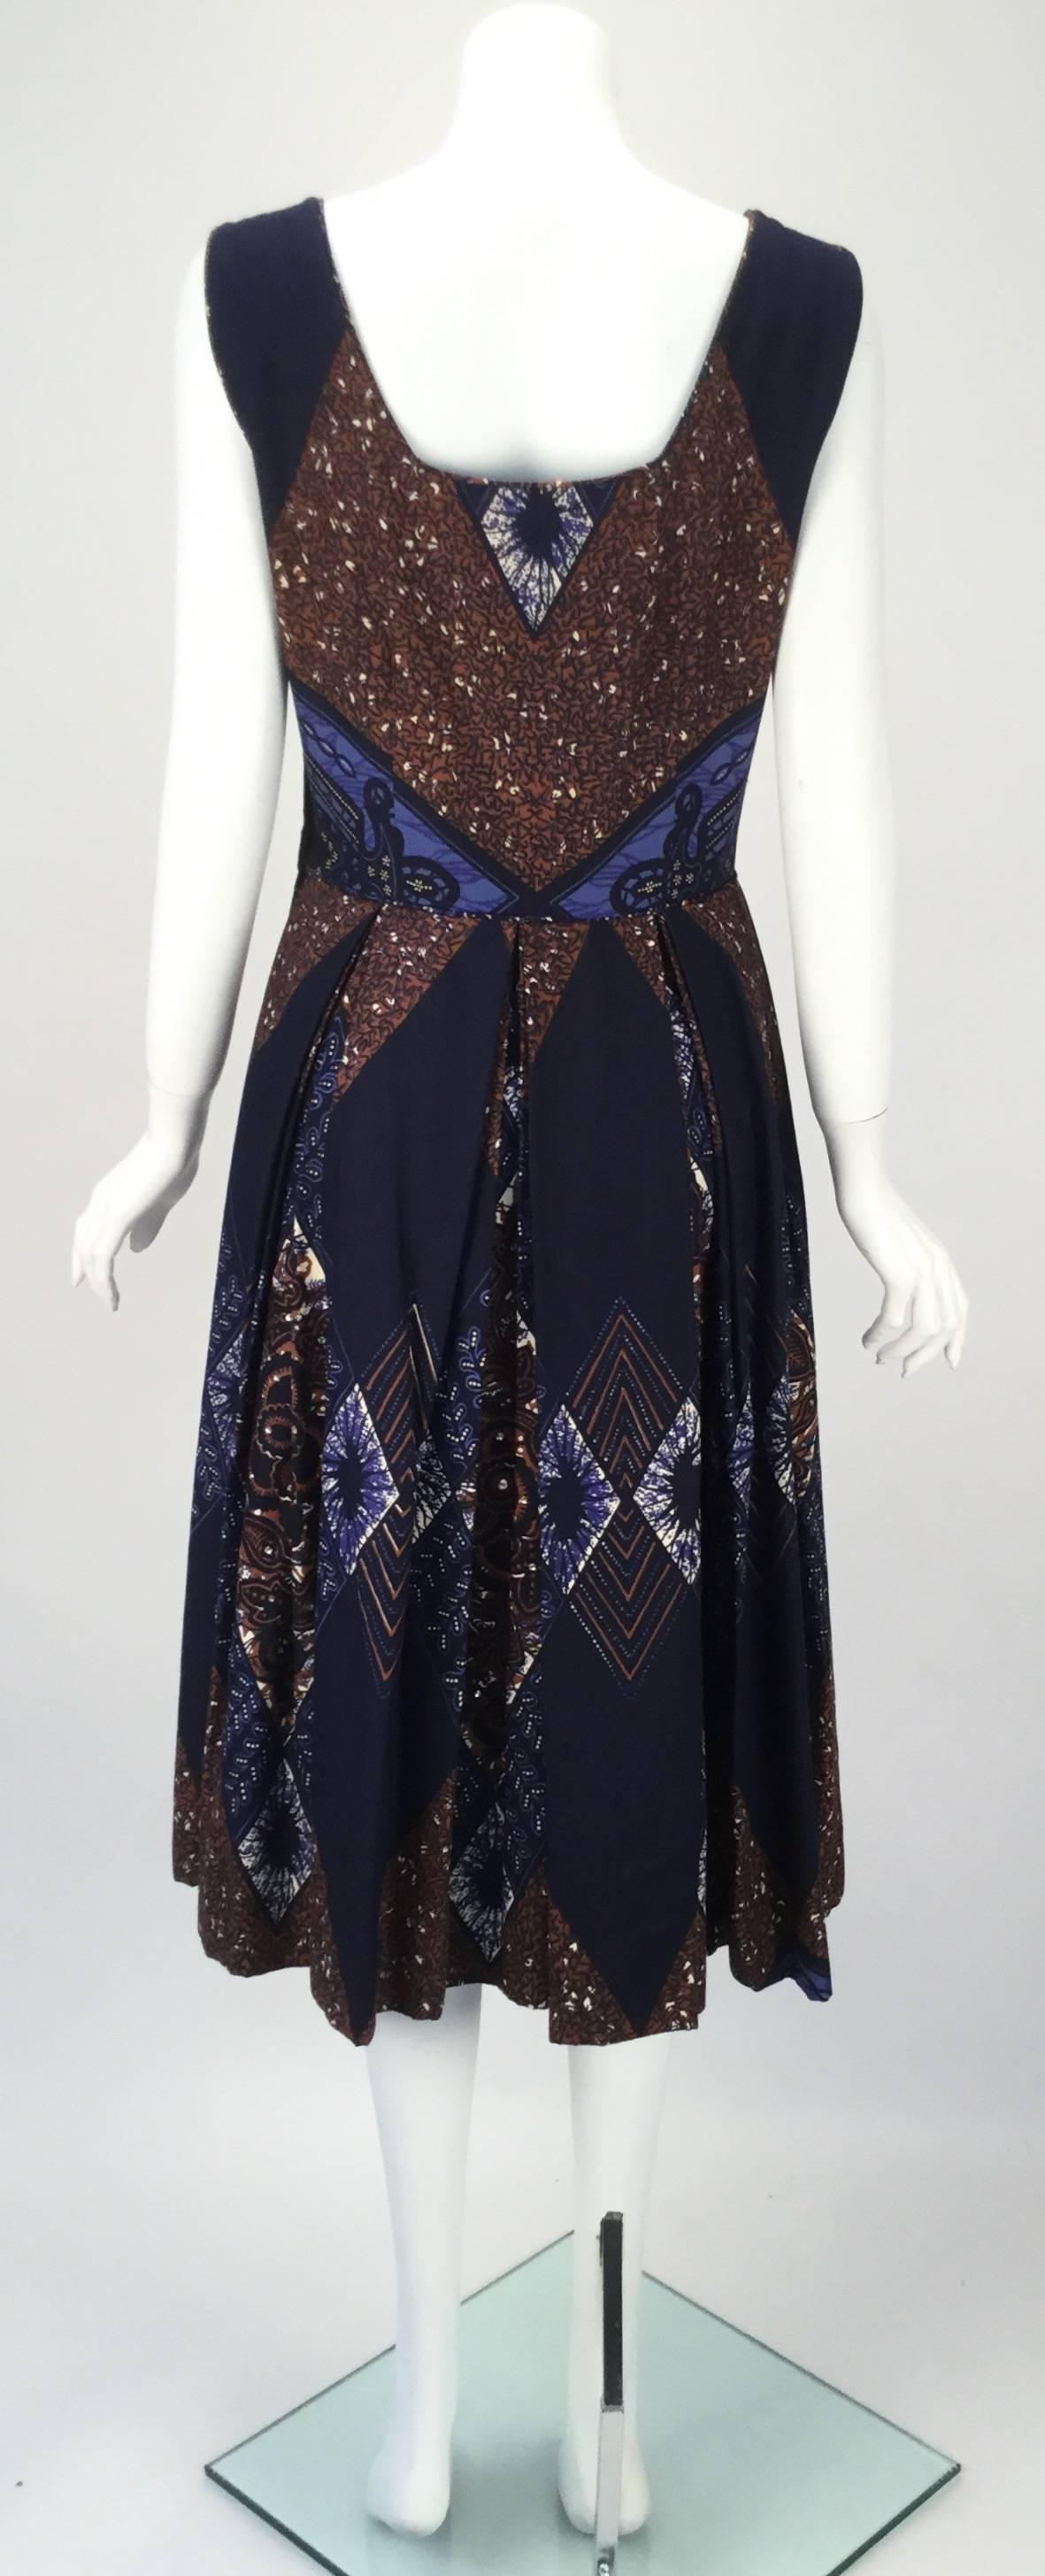 Ikat Blue and Brown Dress with Subtle Sequin Handwork, 1950s  In Excellent Condition For Sale In Houston, TX